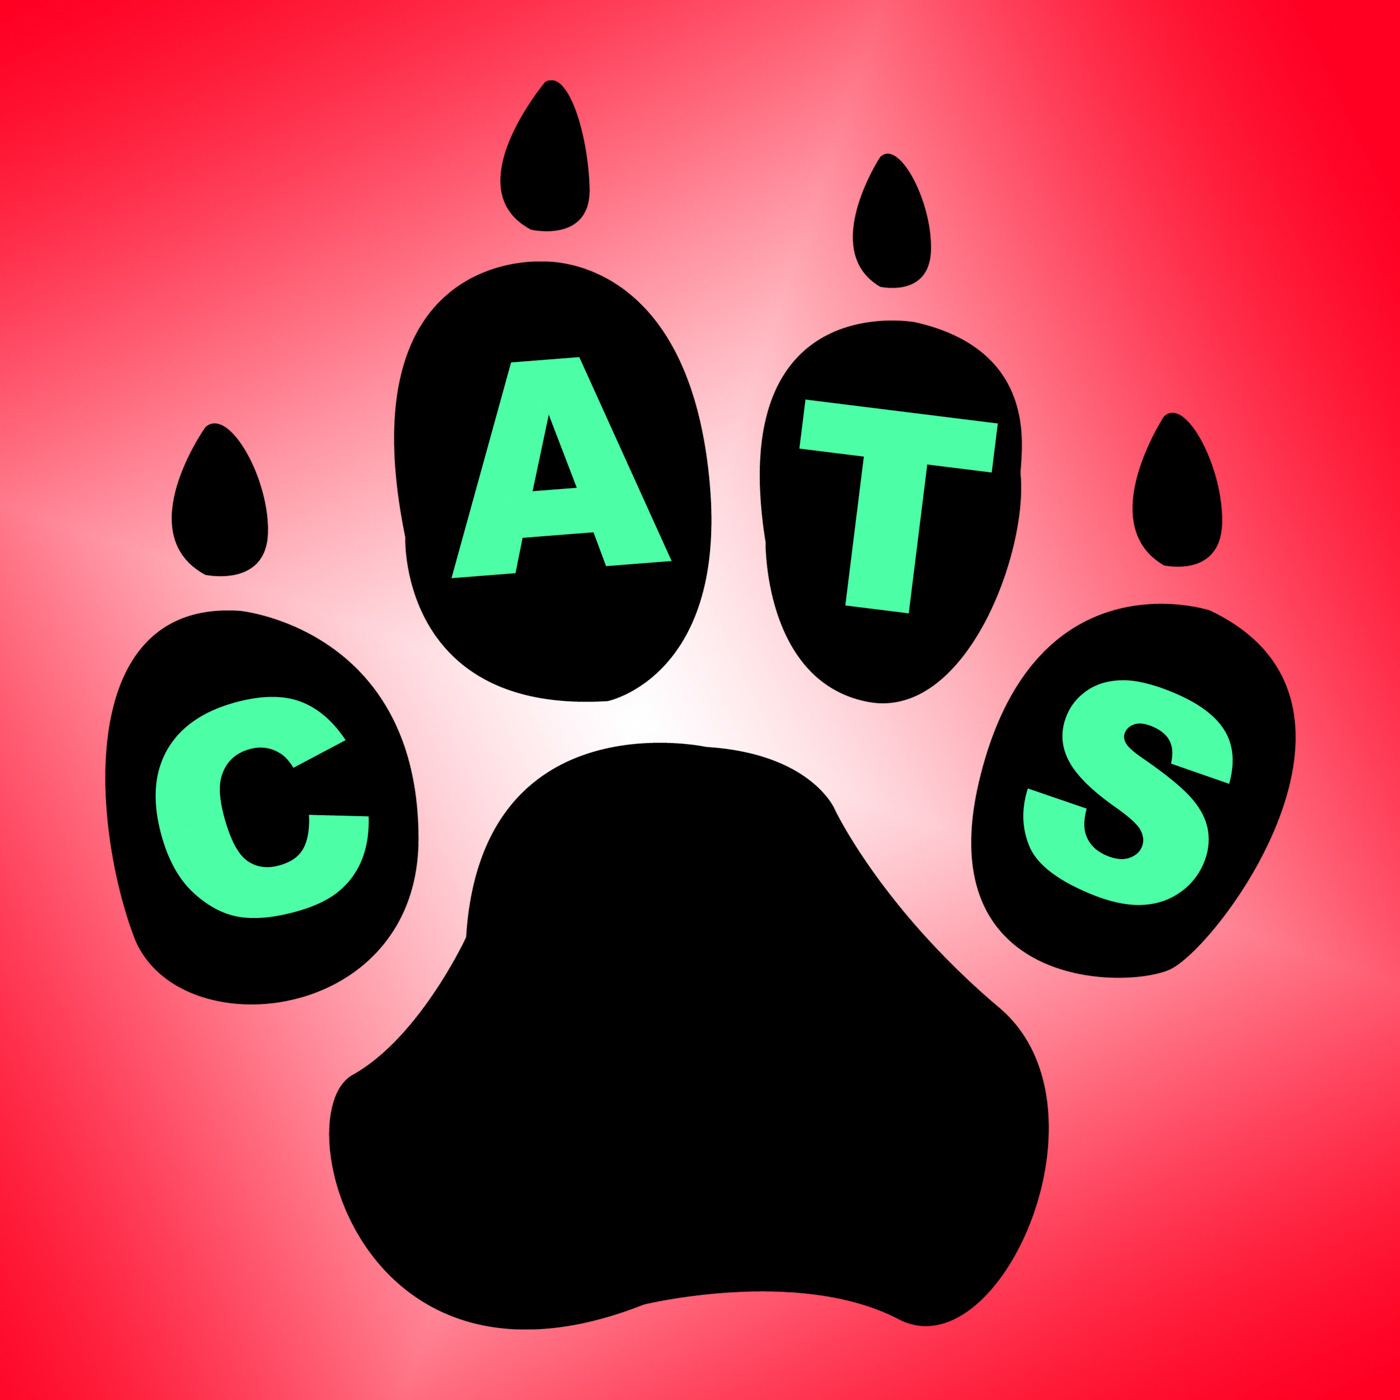 Cats paw shows pet services and feline photo